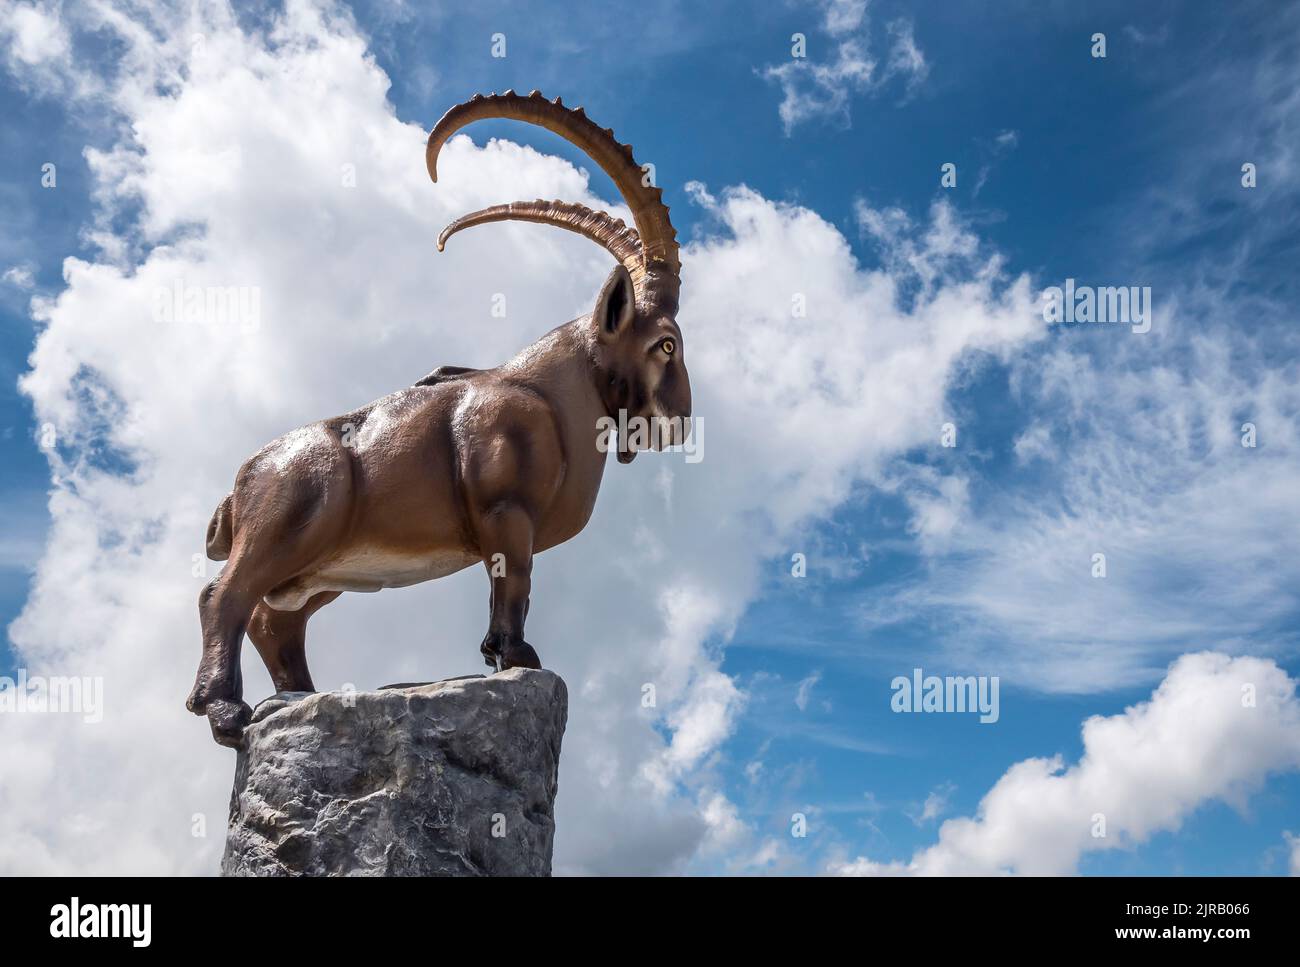 Sculpture of the Ibex Steinbok antelope at the Penkenjoch recreational area above the town of Mayrhofen in the Zillertal Alps of the Austrian Tirol Stock Photo